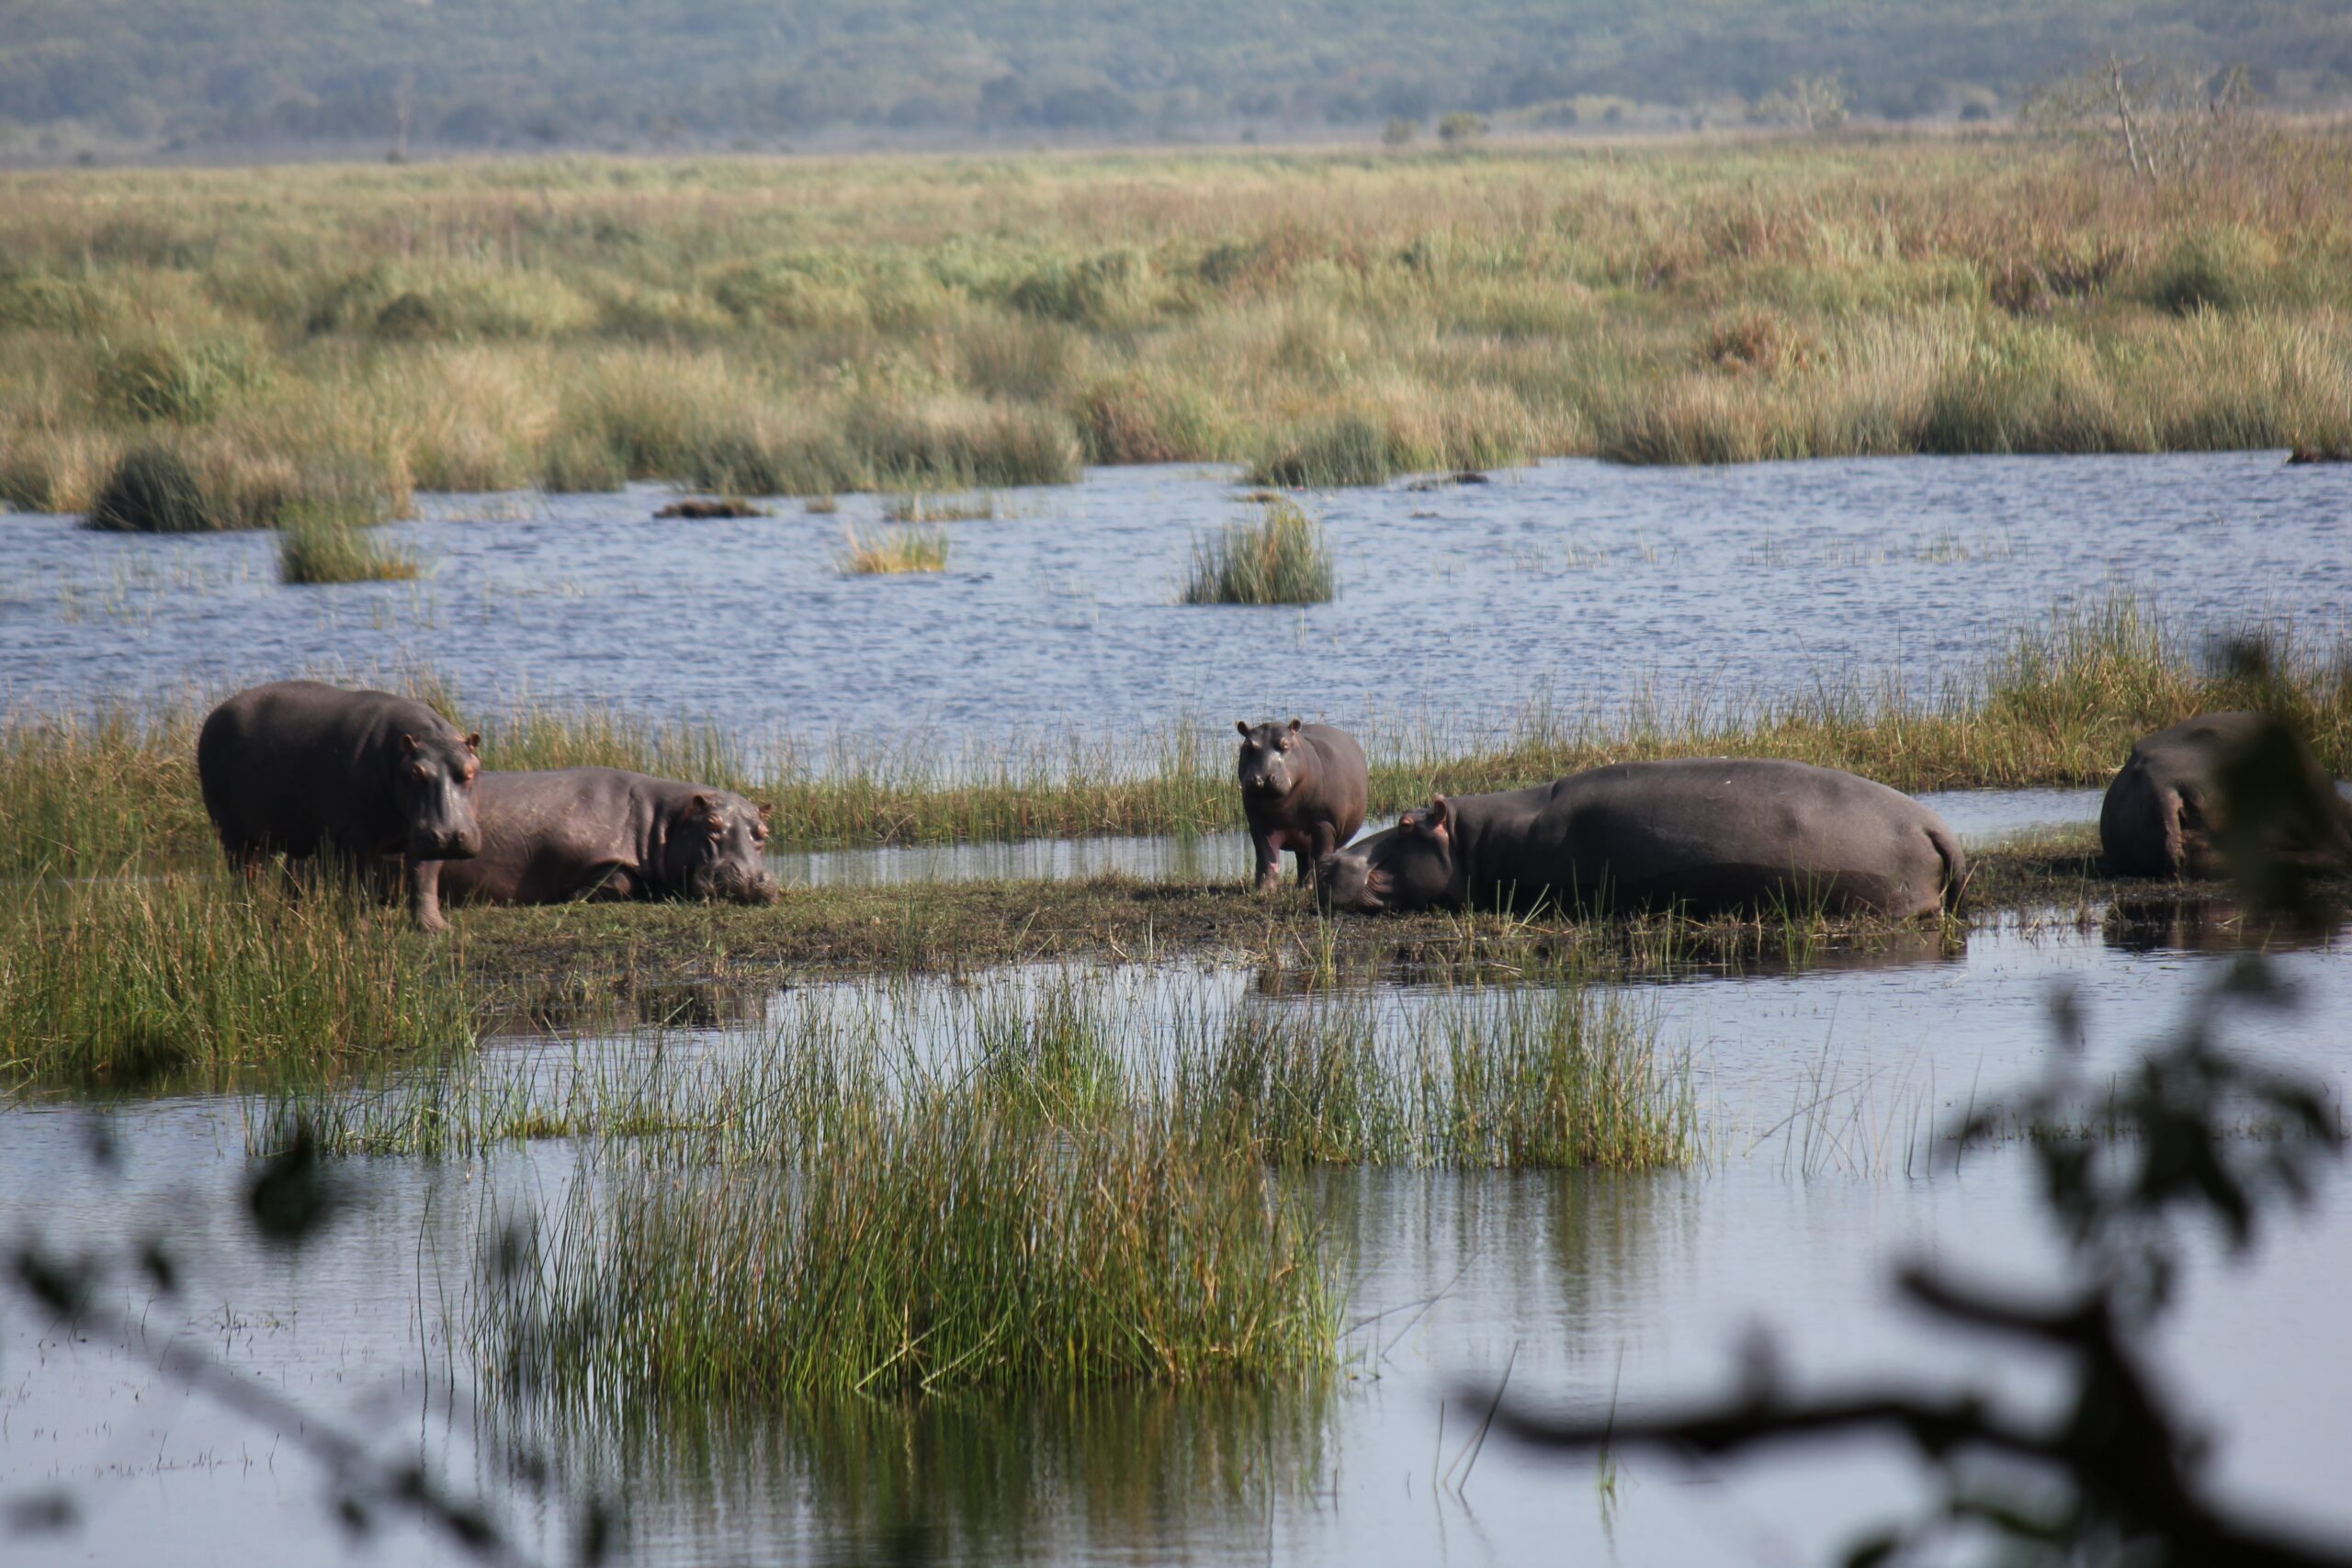 hippos in the water